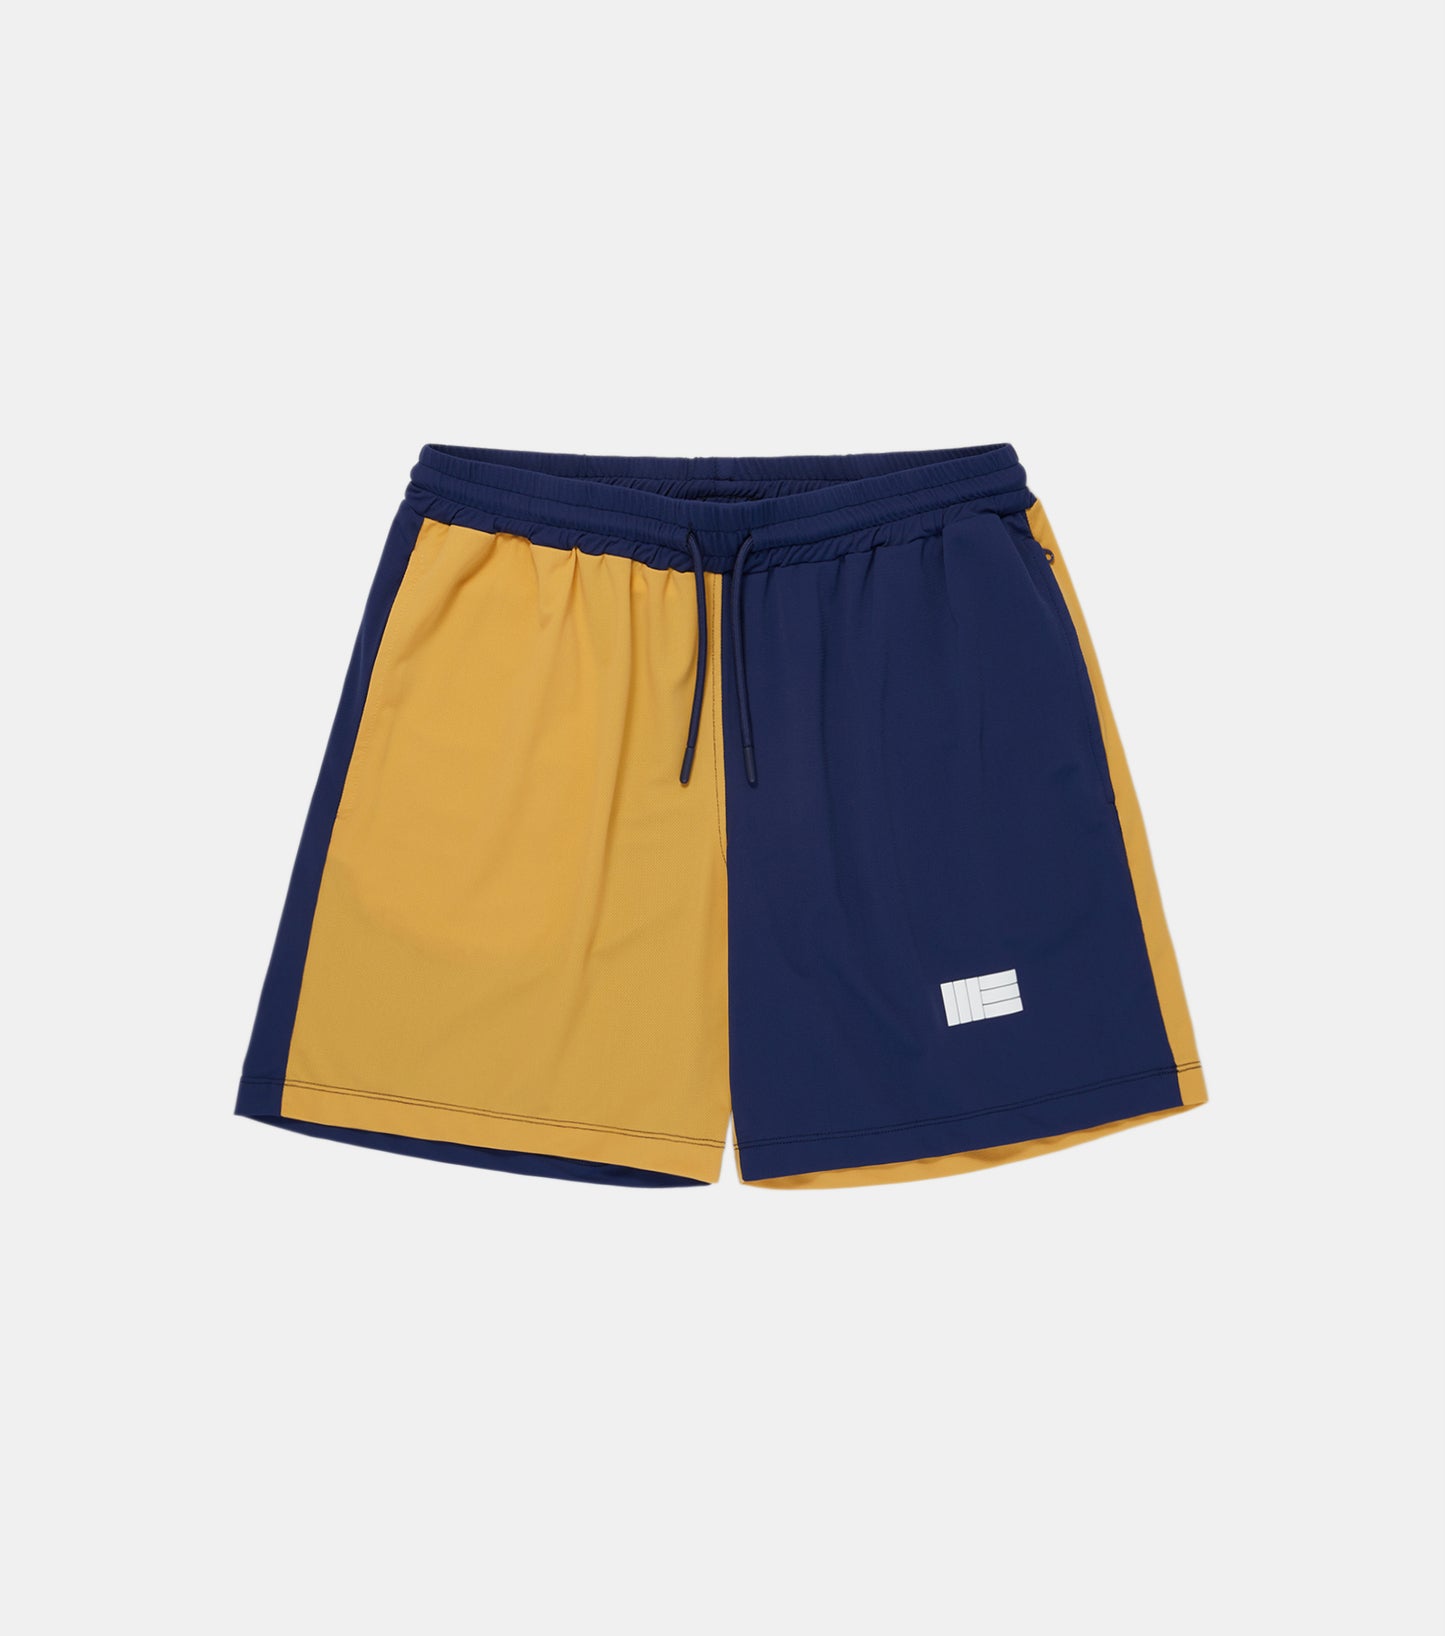 Mens Premium Athletic Sport Shorts Made in NYC - Navy / Yellow